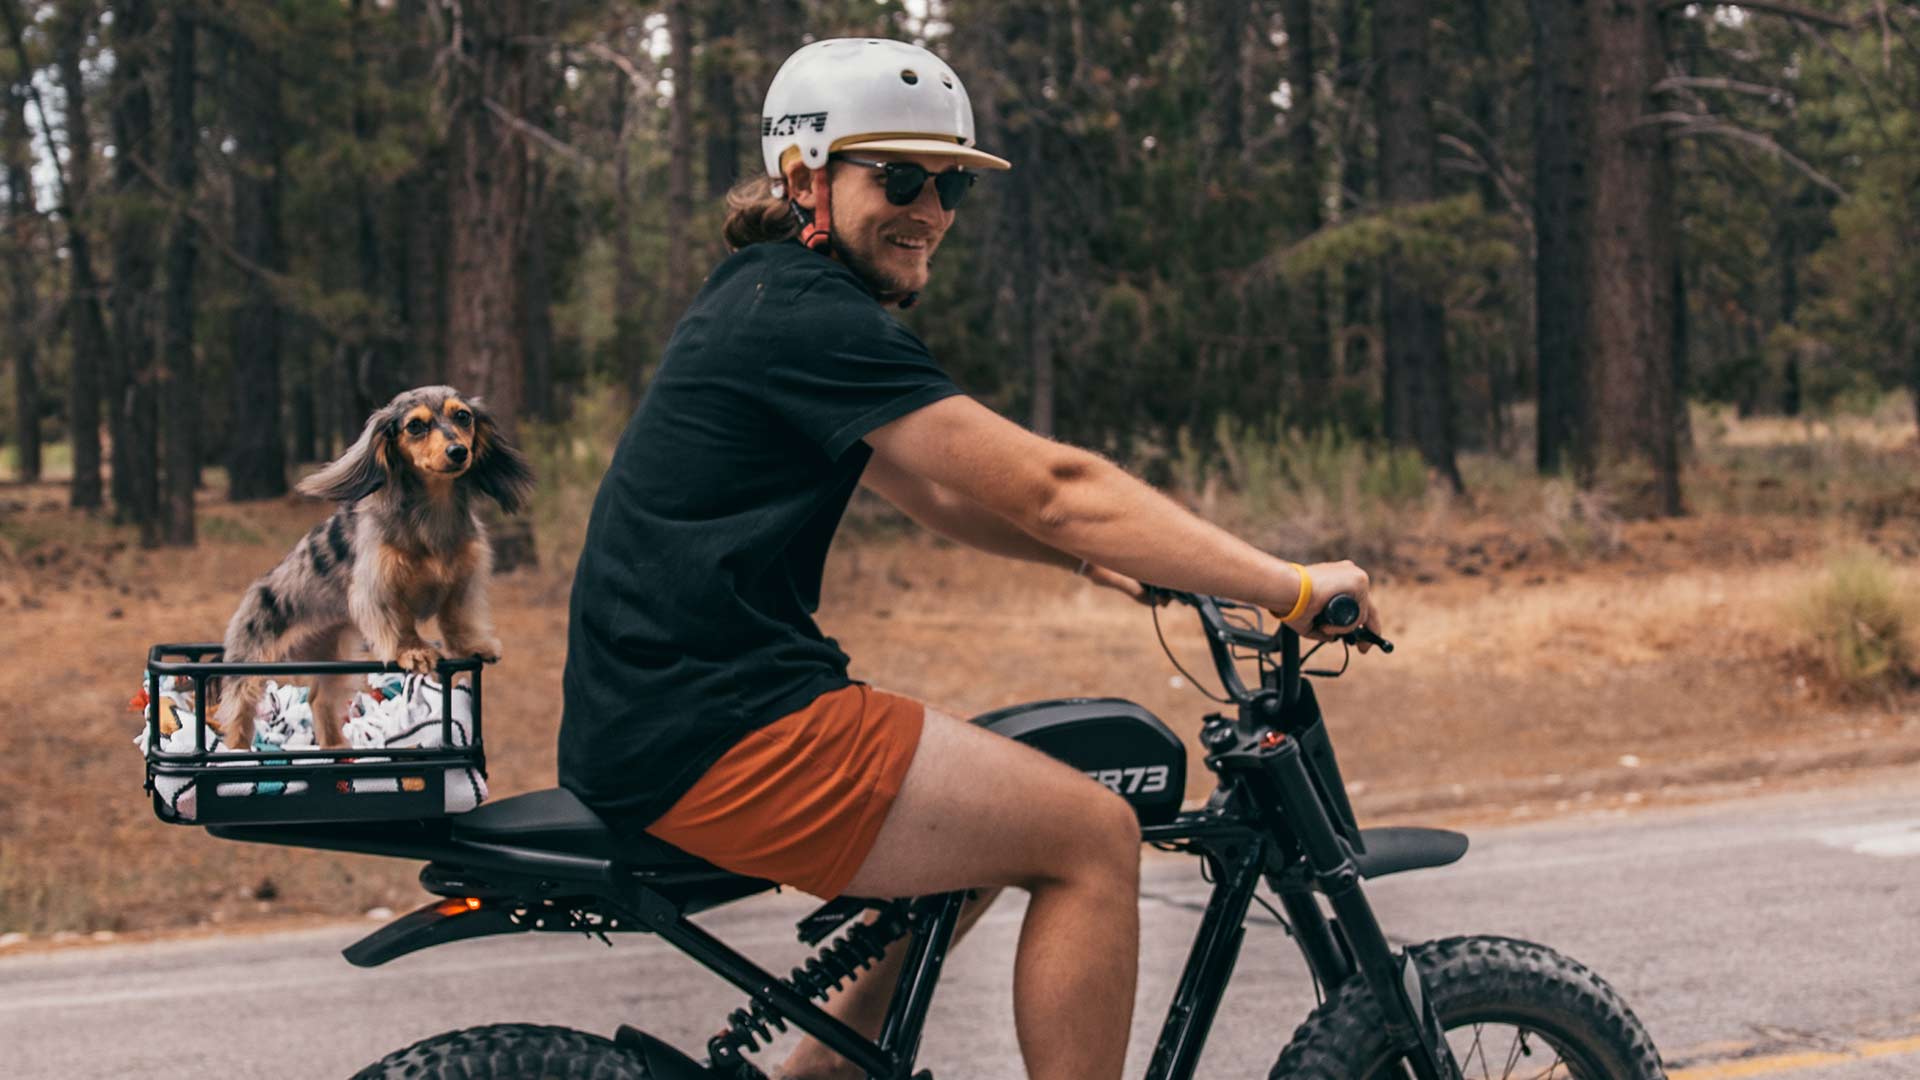 Young man riding a Super73 ebike on the road with a rear rack attached and his dog in a basket